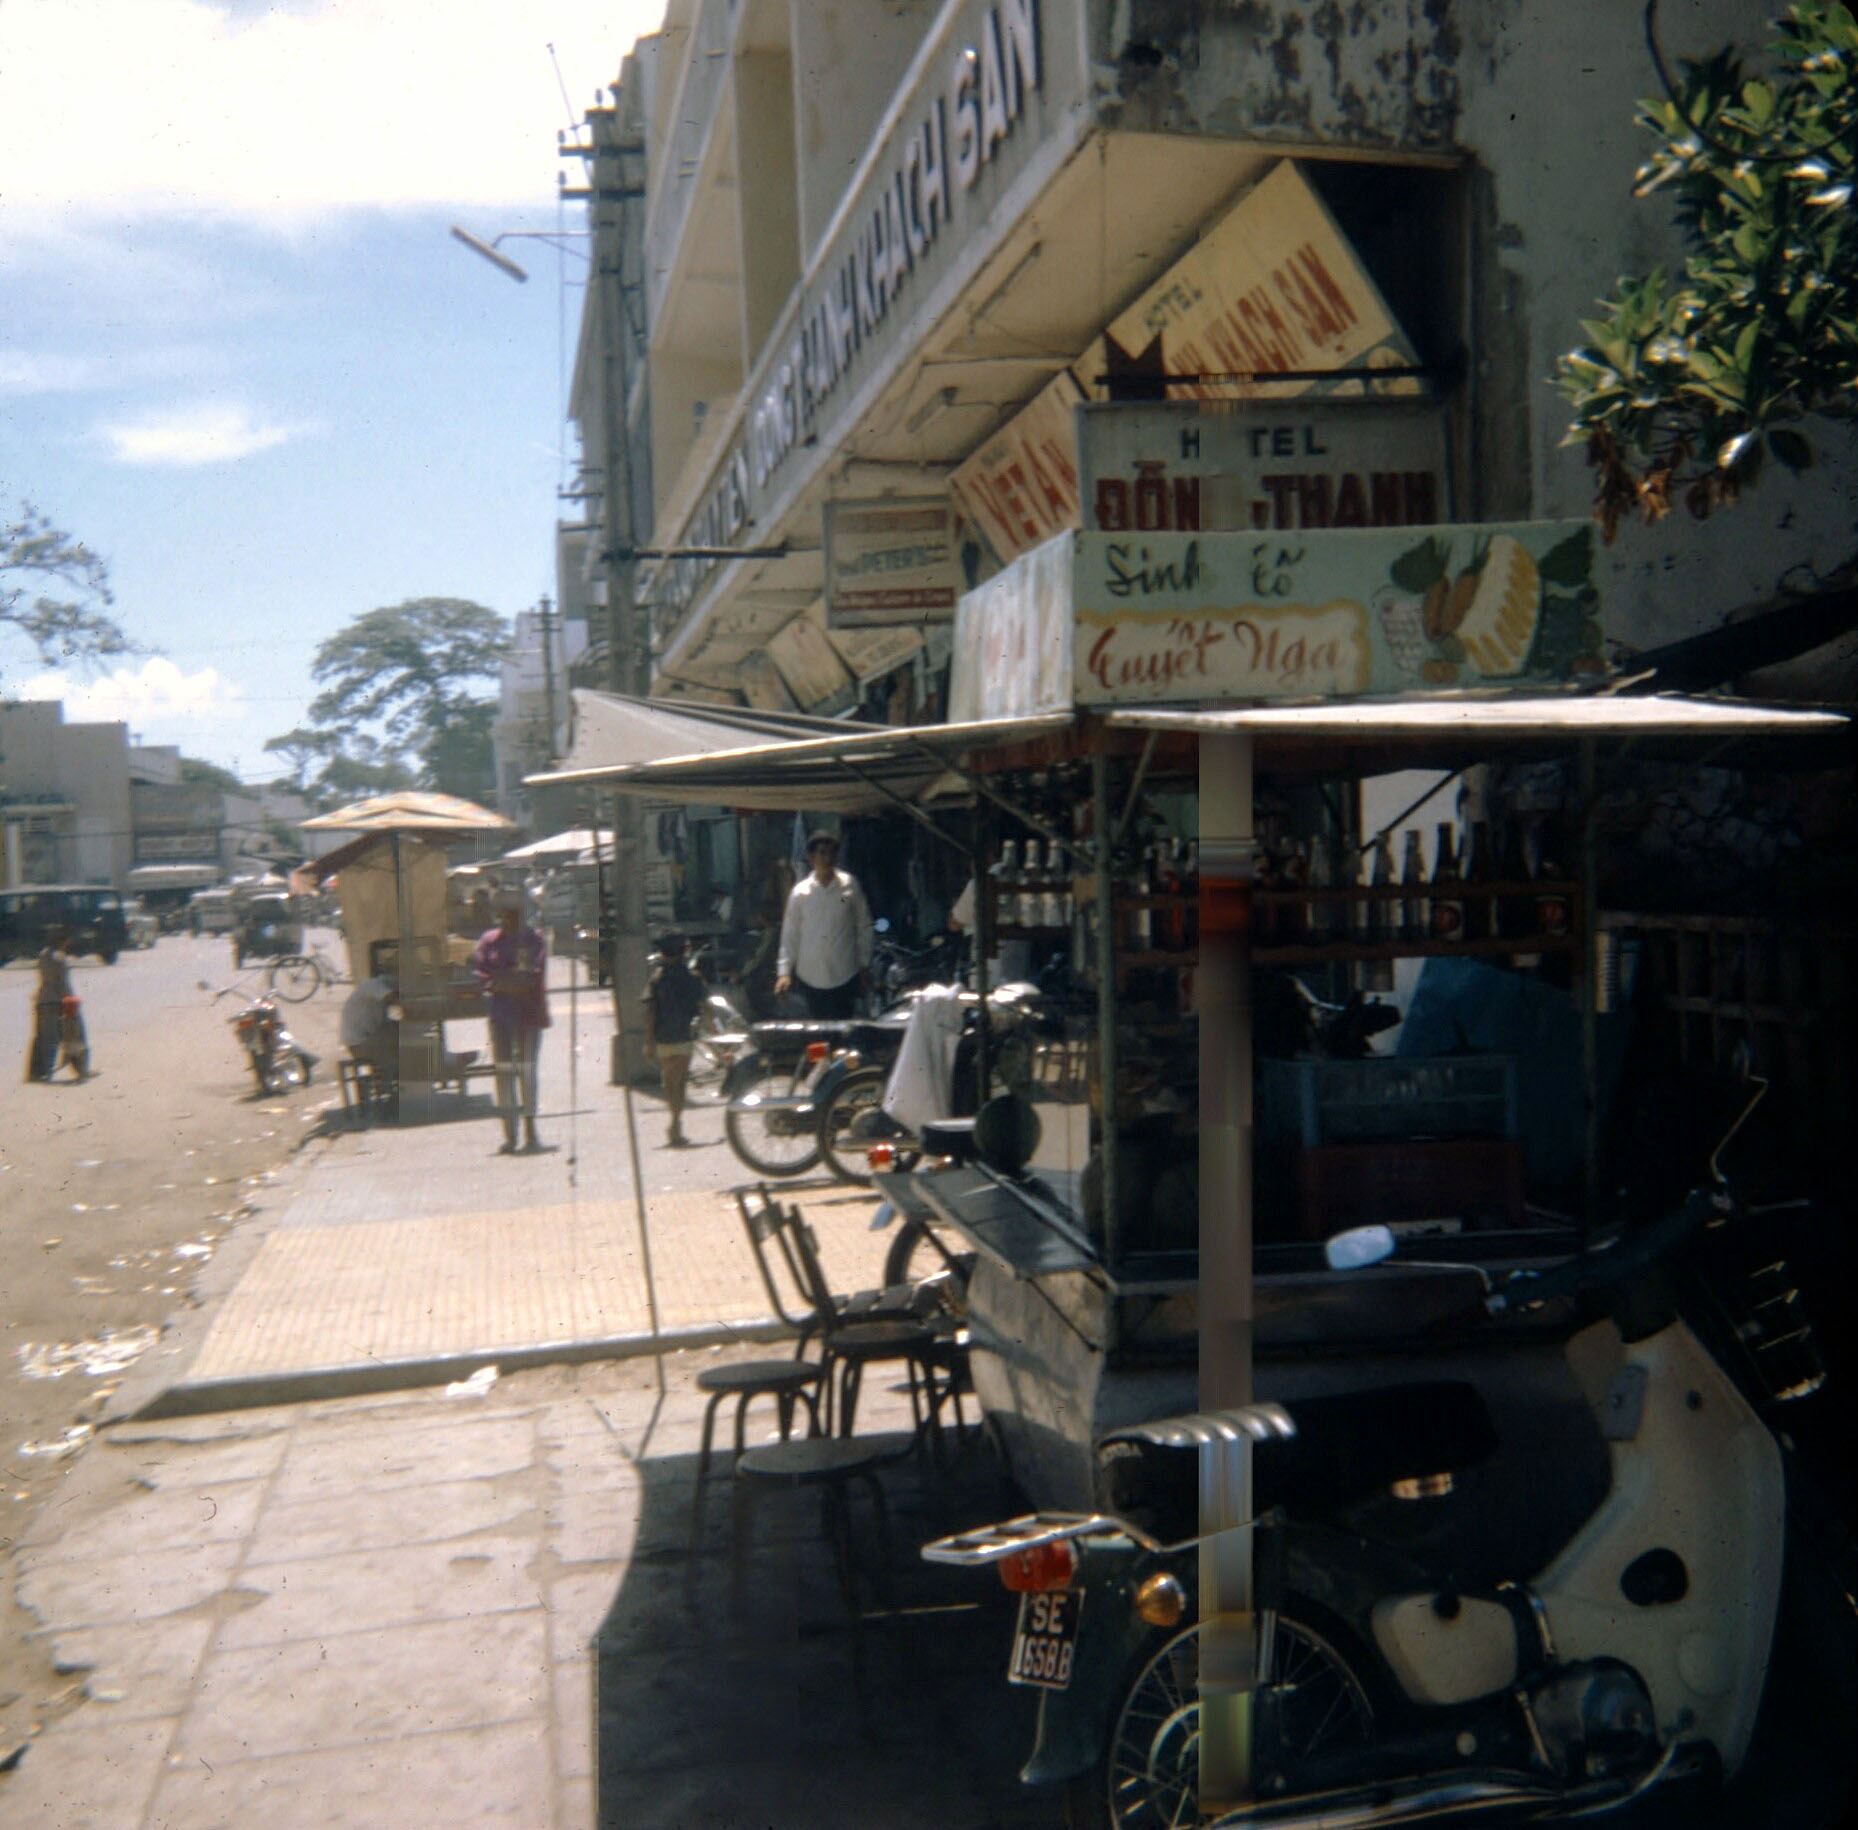 an image of shops with carts and people in the street